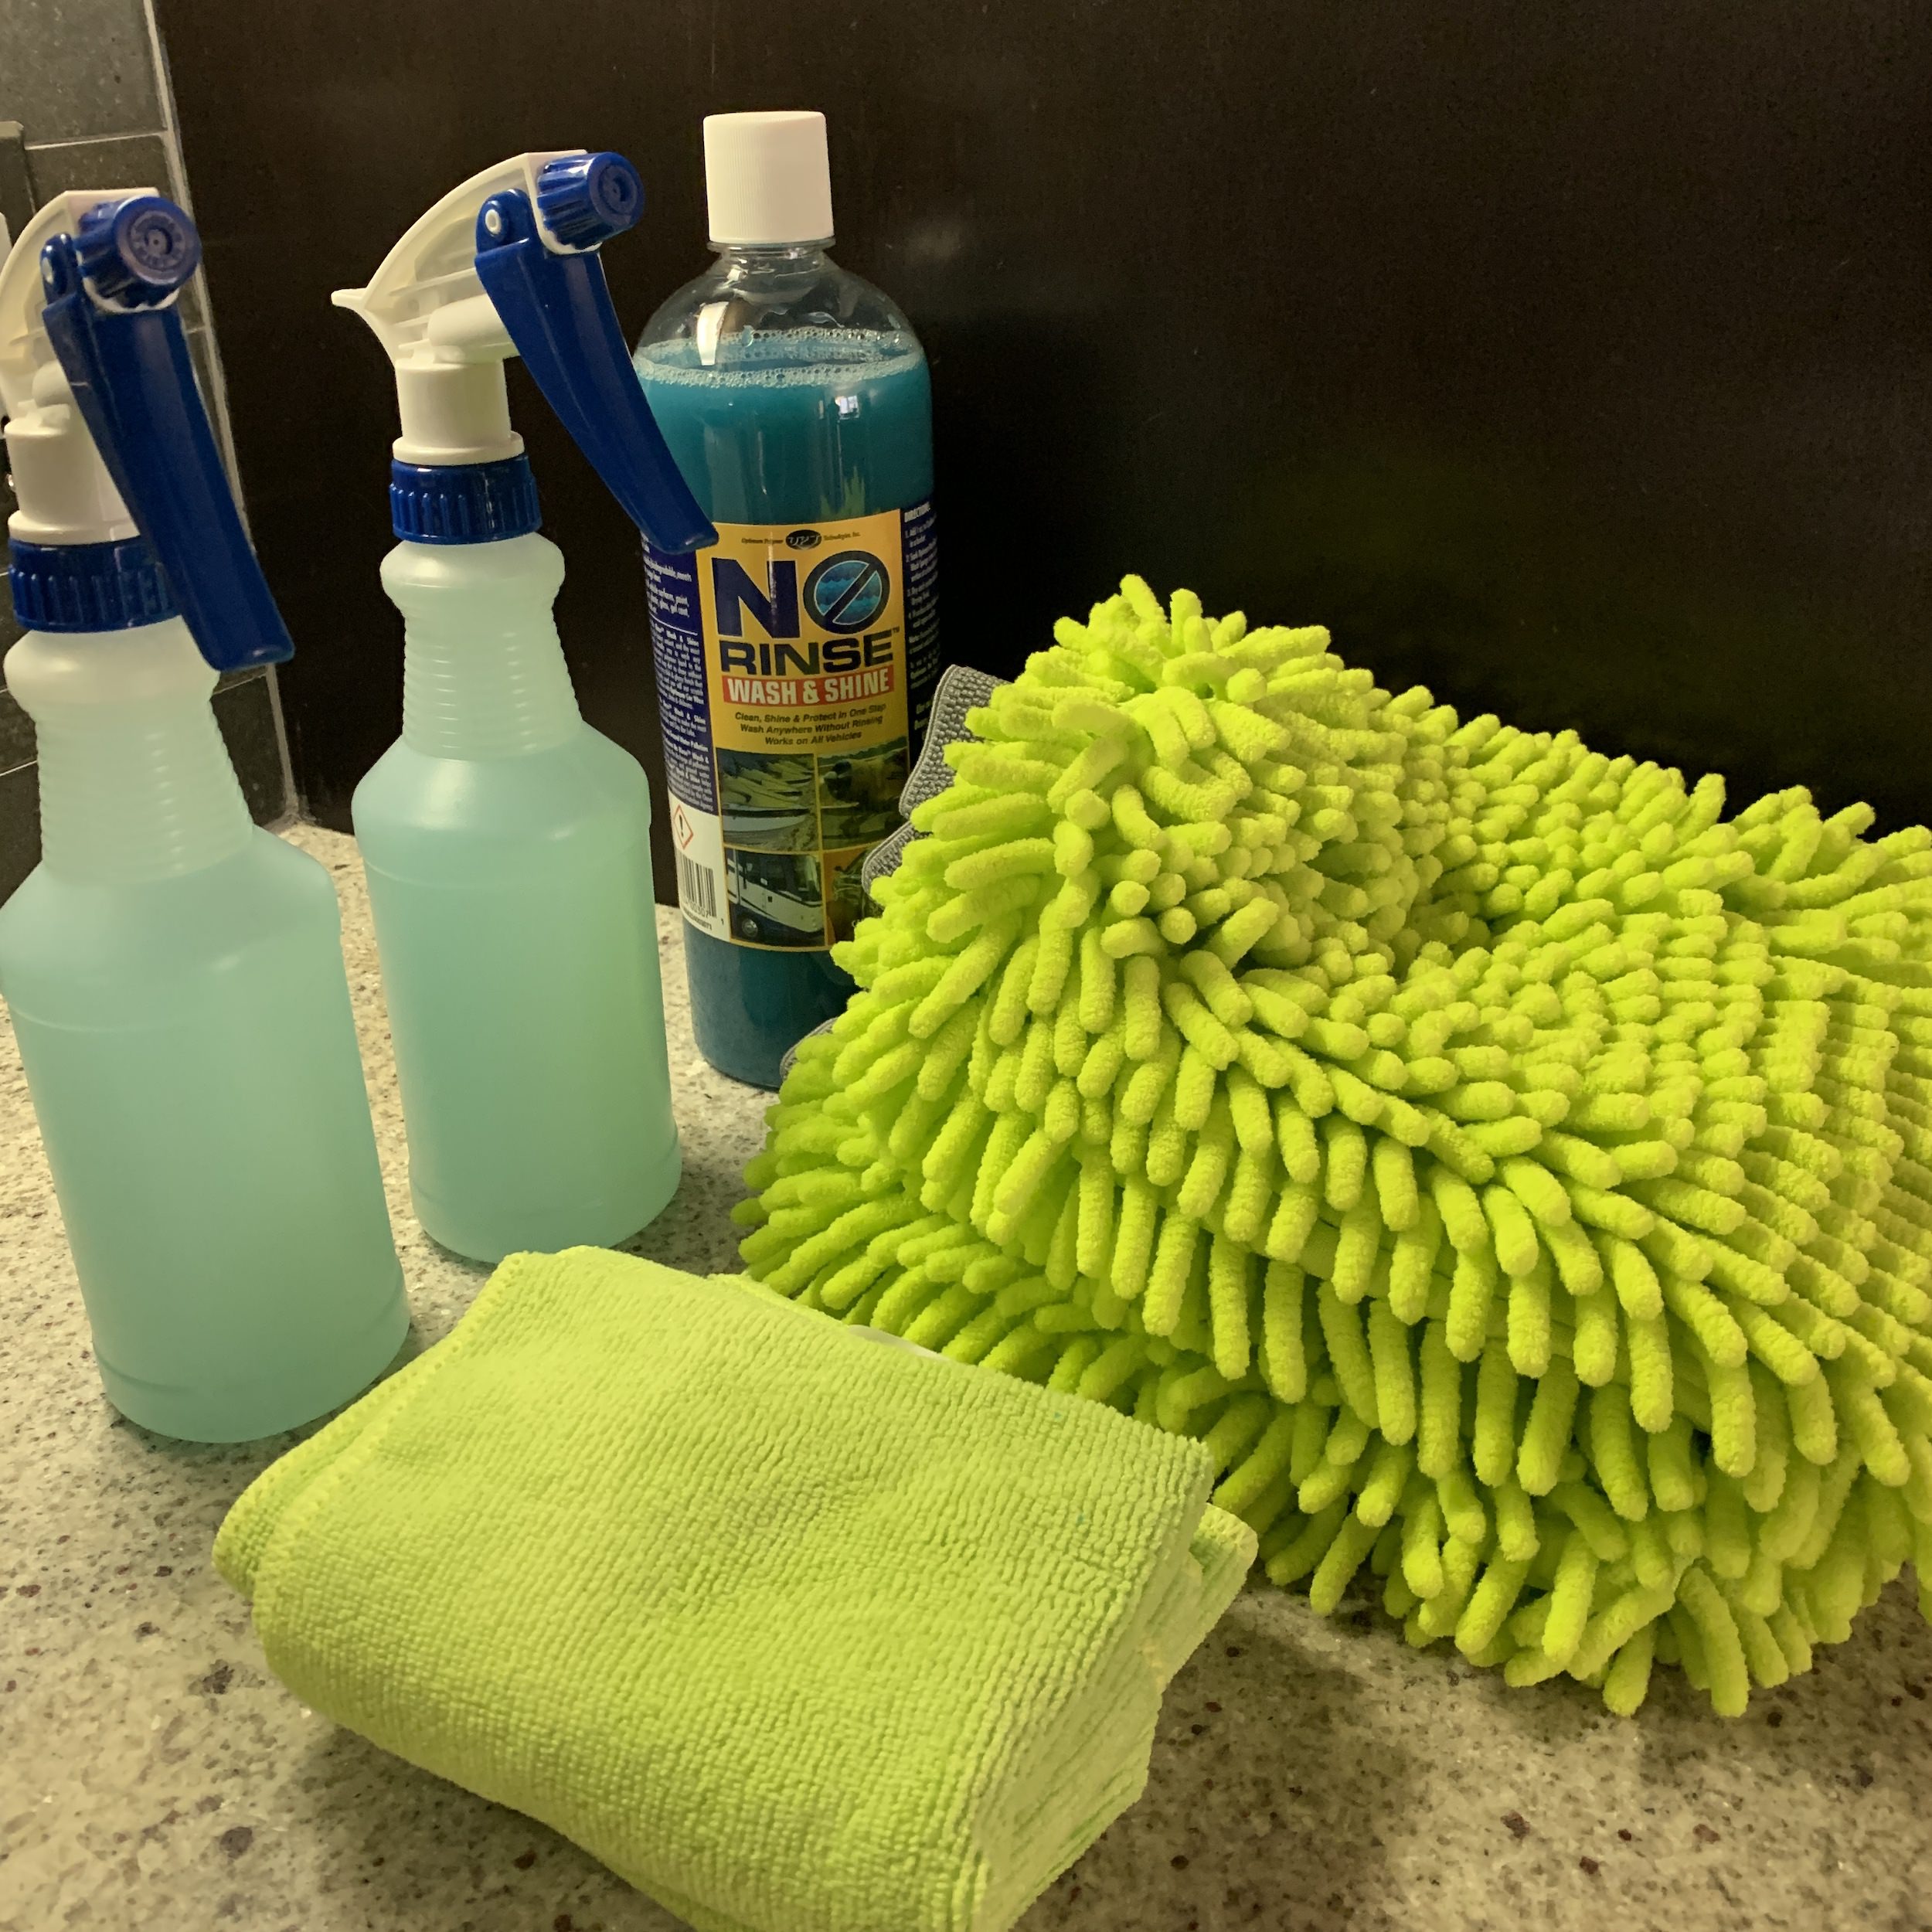 Optimum No Rinse wash and shine: one step to a clean car